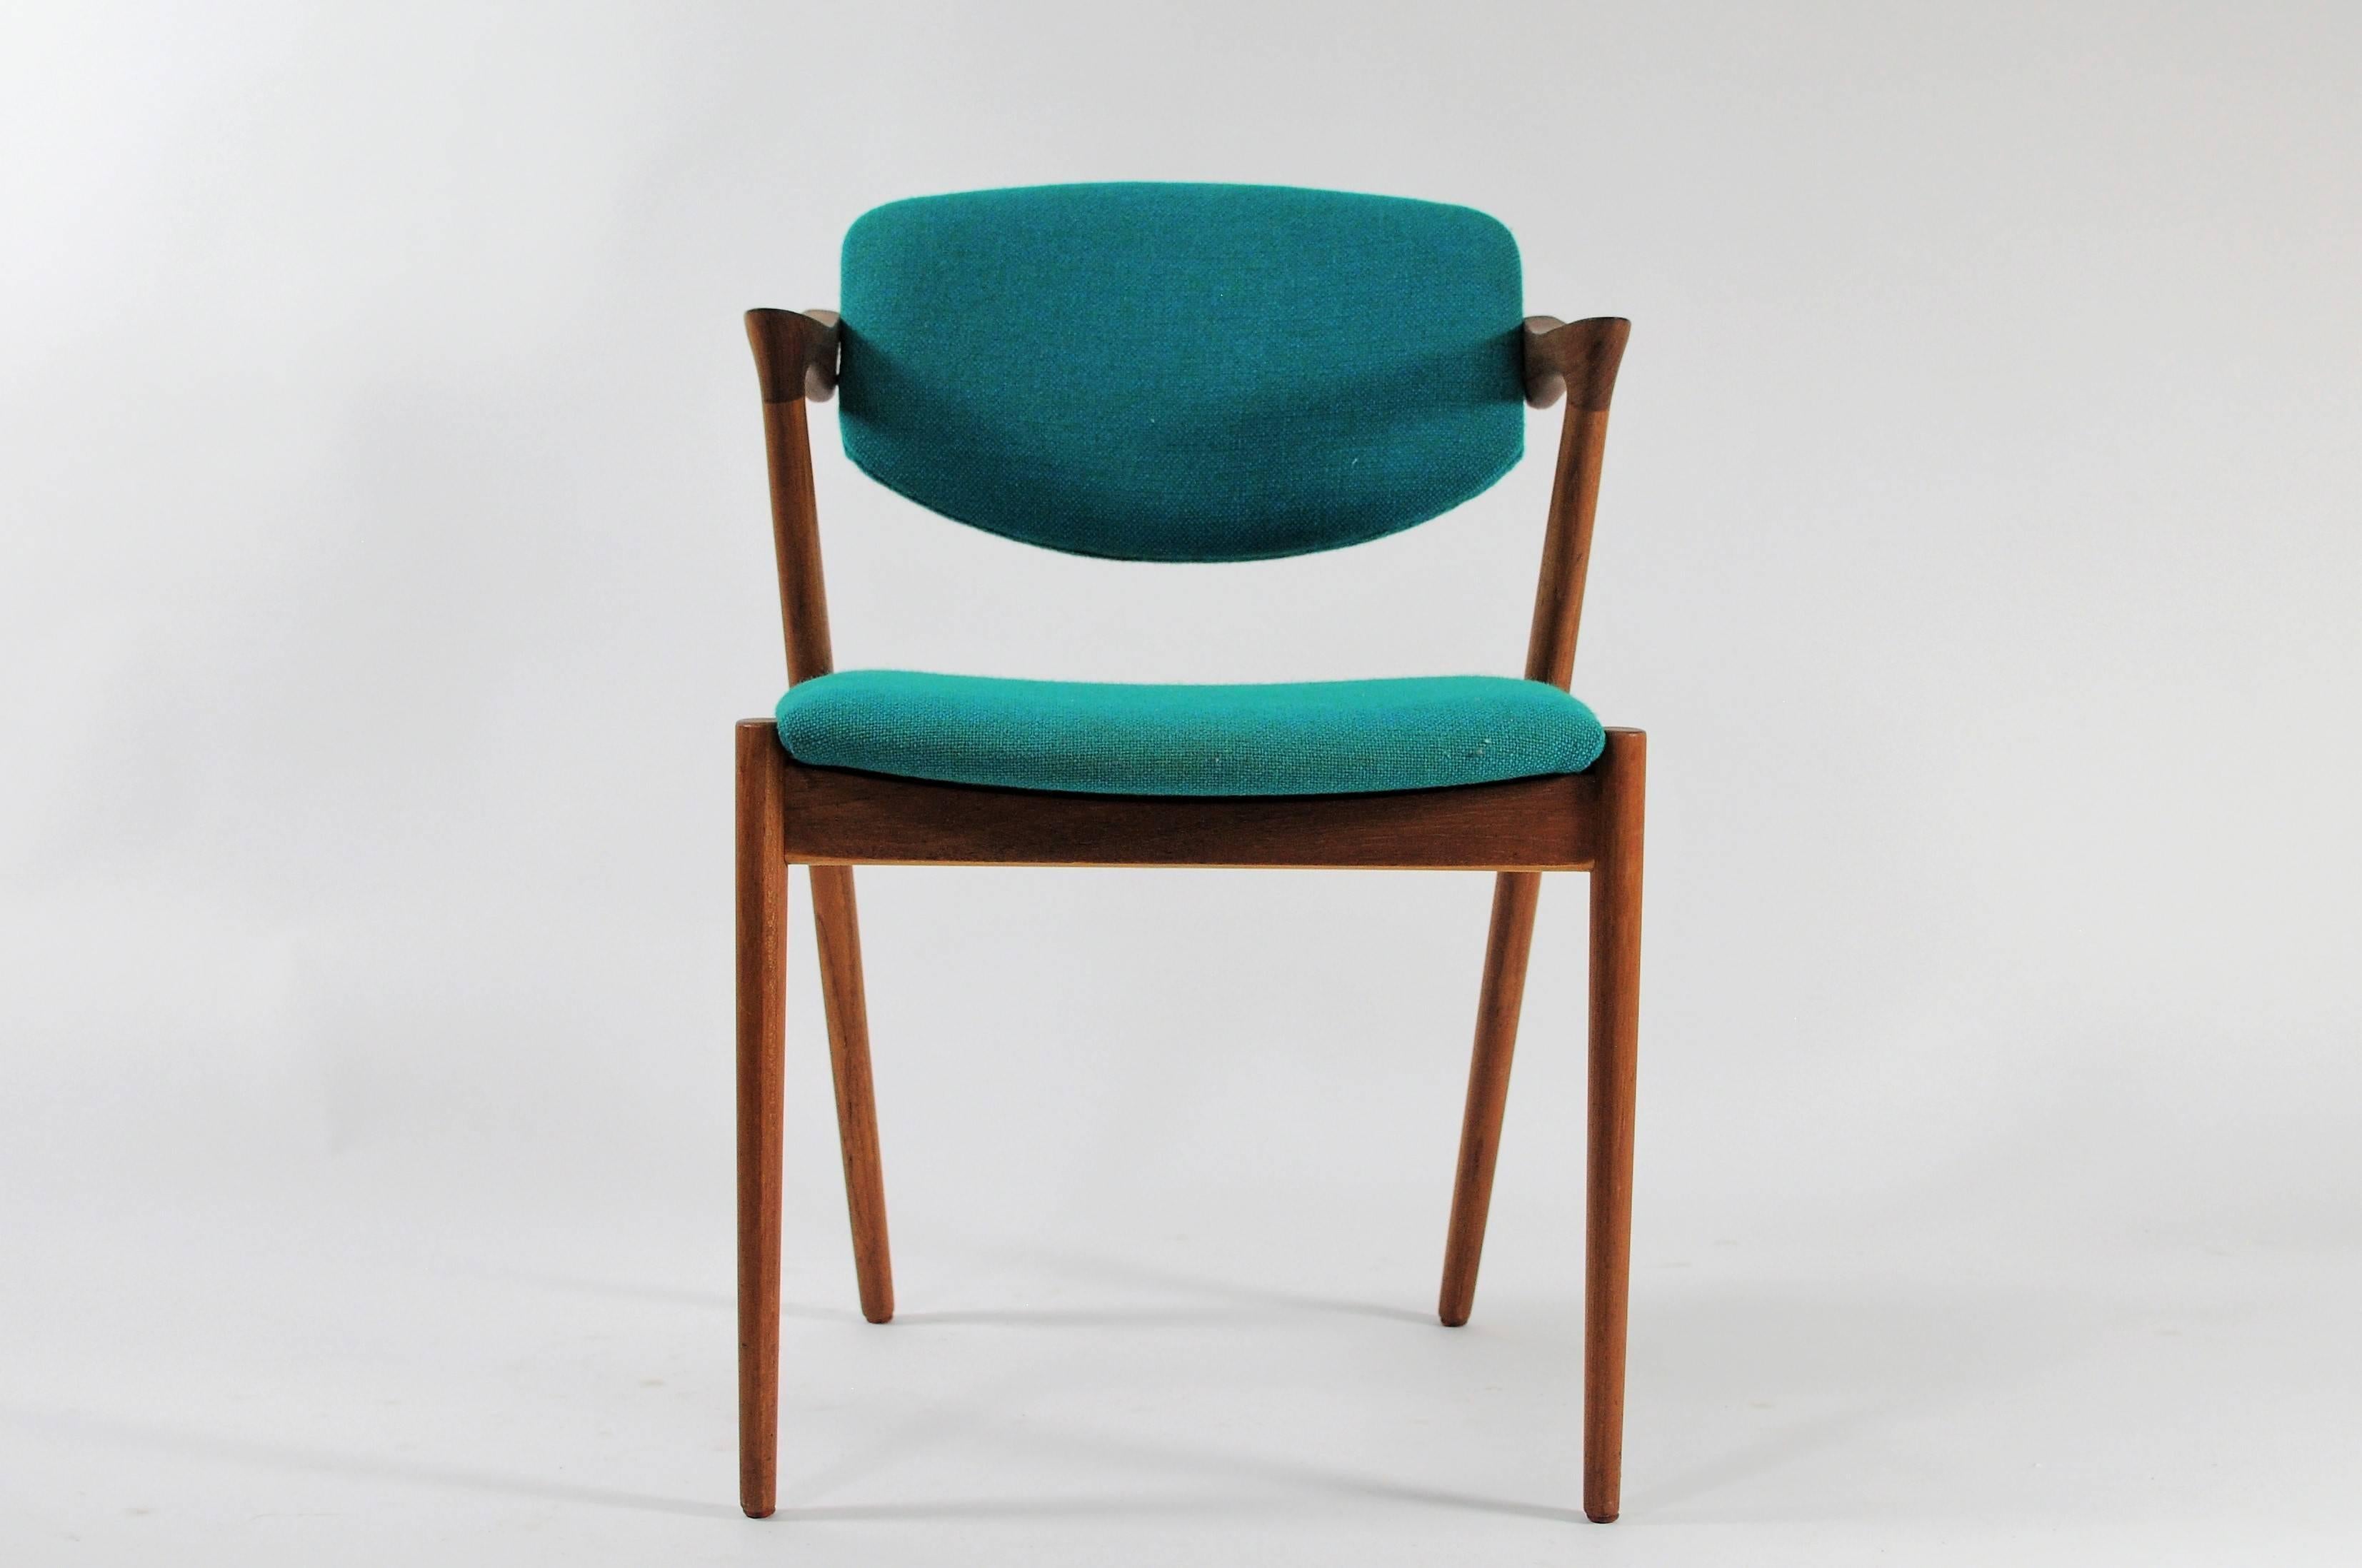 Set of 4 model 42 teak dining chairs with adjustable backrest by Kai Kristiansen for Schous Møbelfabrik.

The chairs have Kai Kristiansens typical light and elegant design that make them fit in easily where you want them in your home - a design